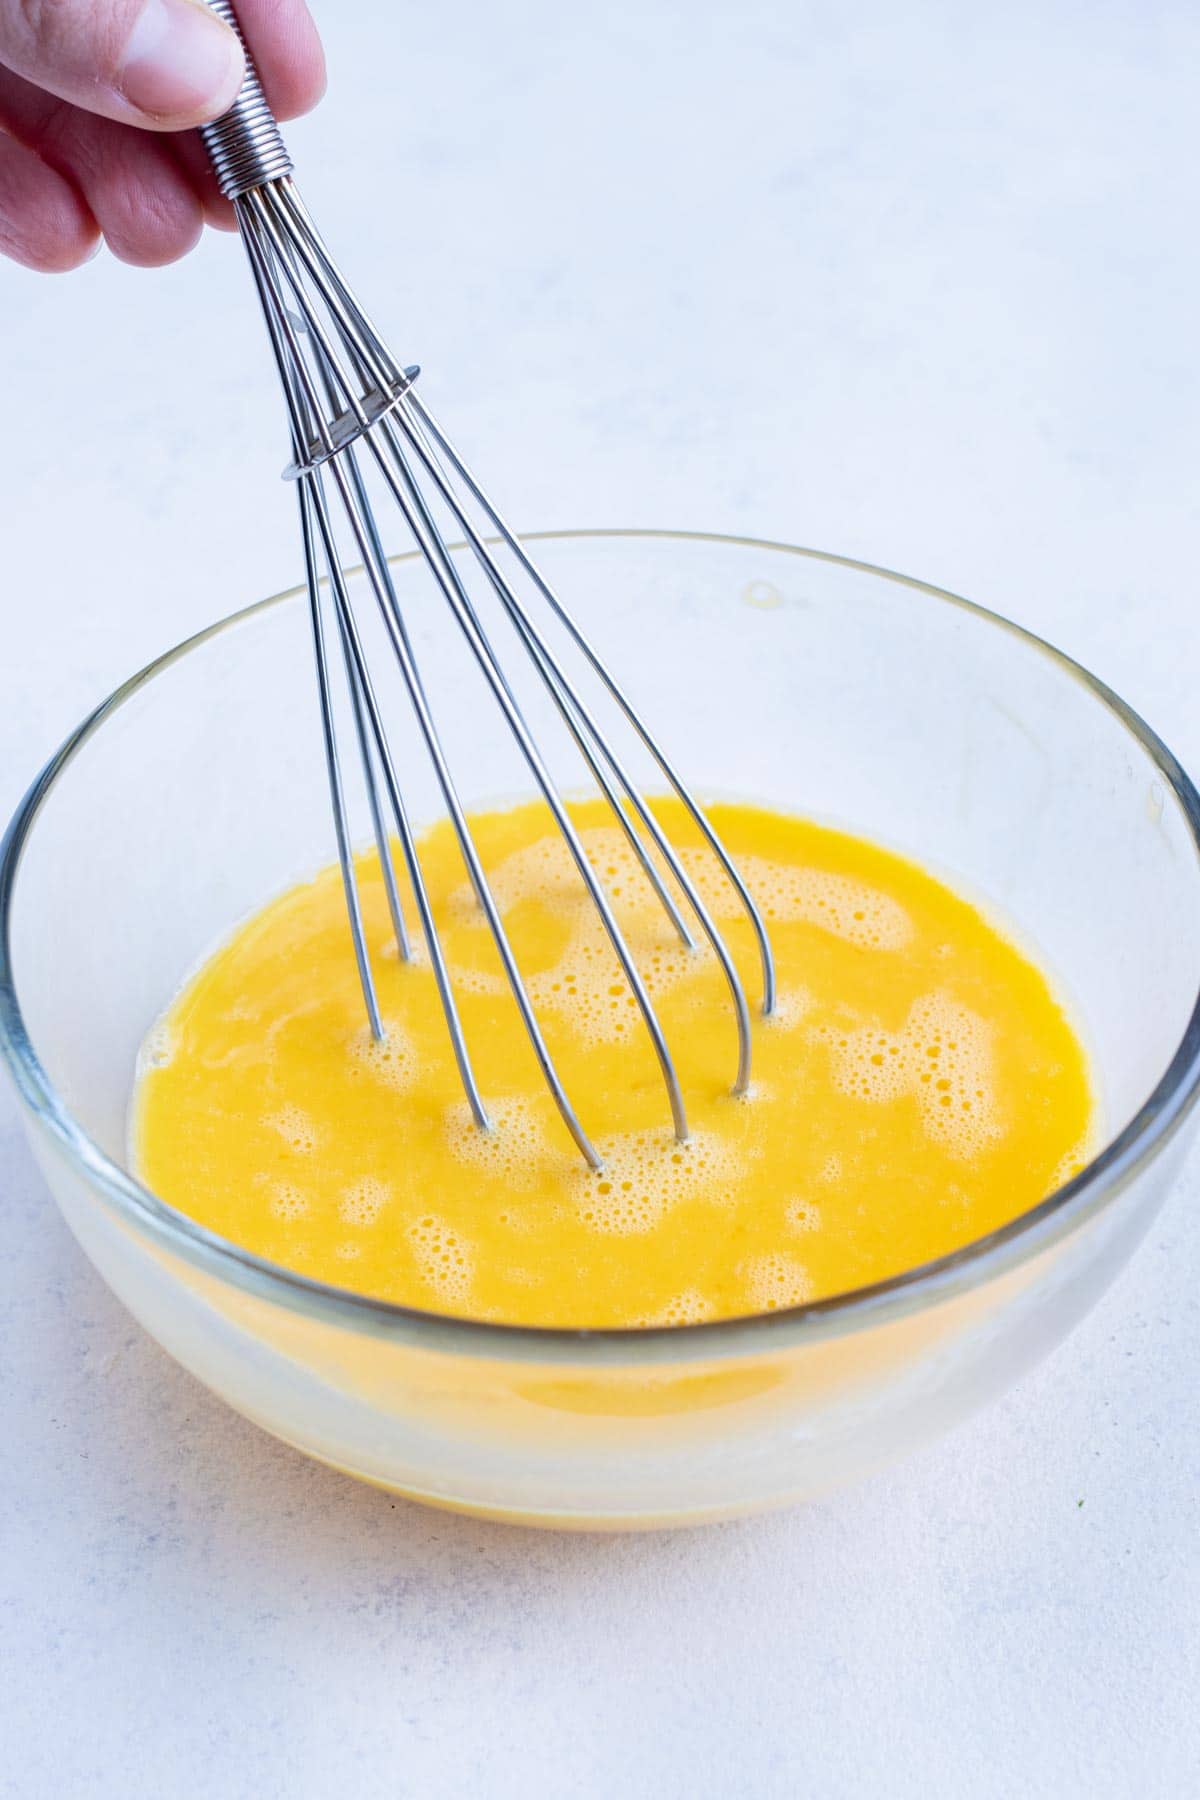 Eggs are whisked in a bowl for this recipe.